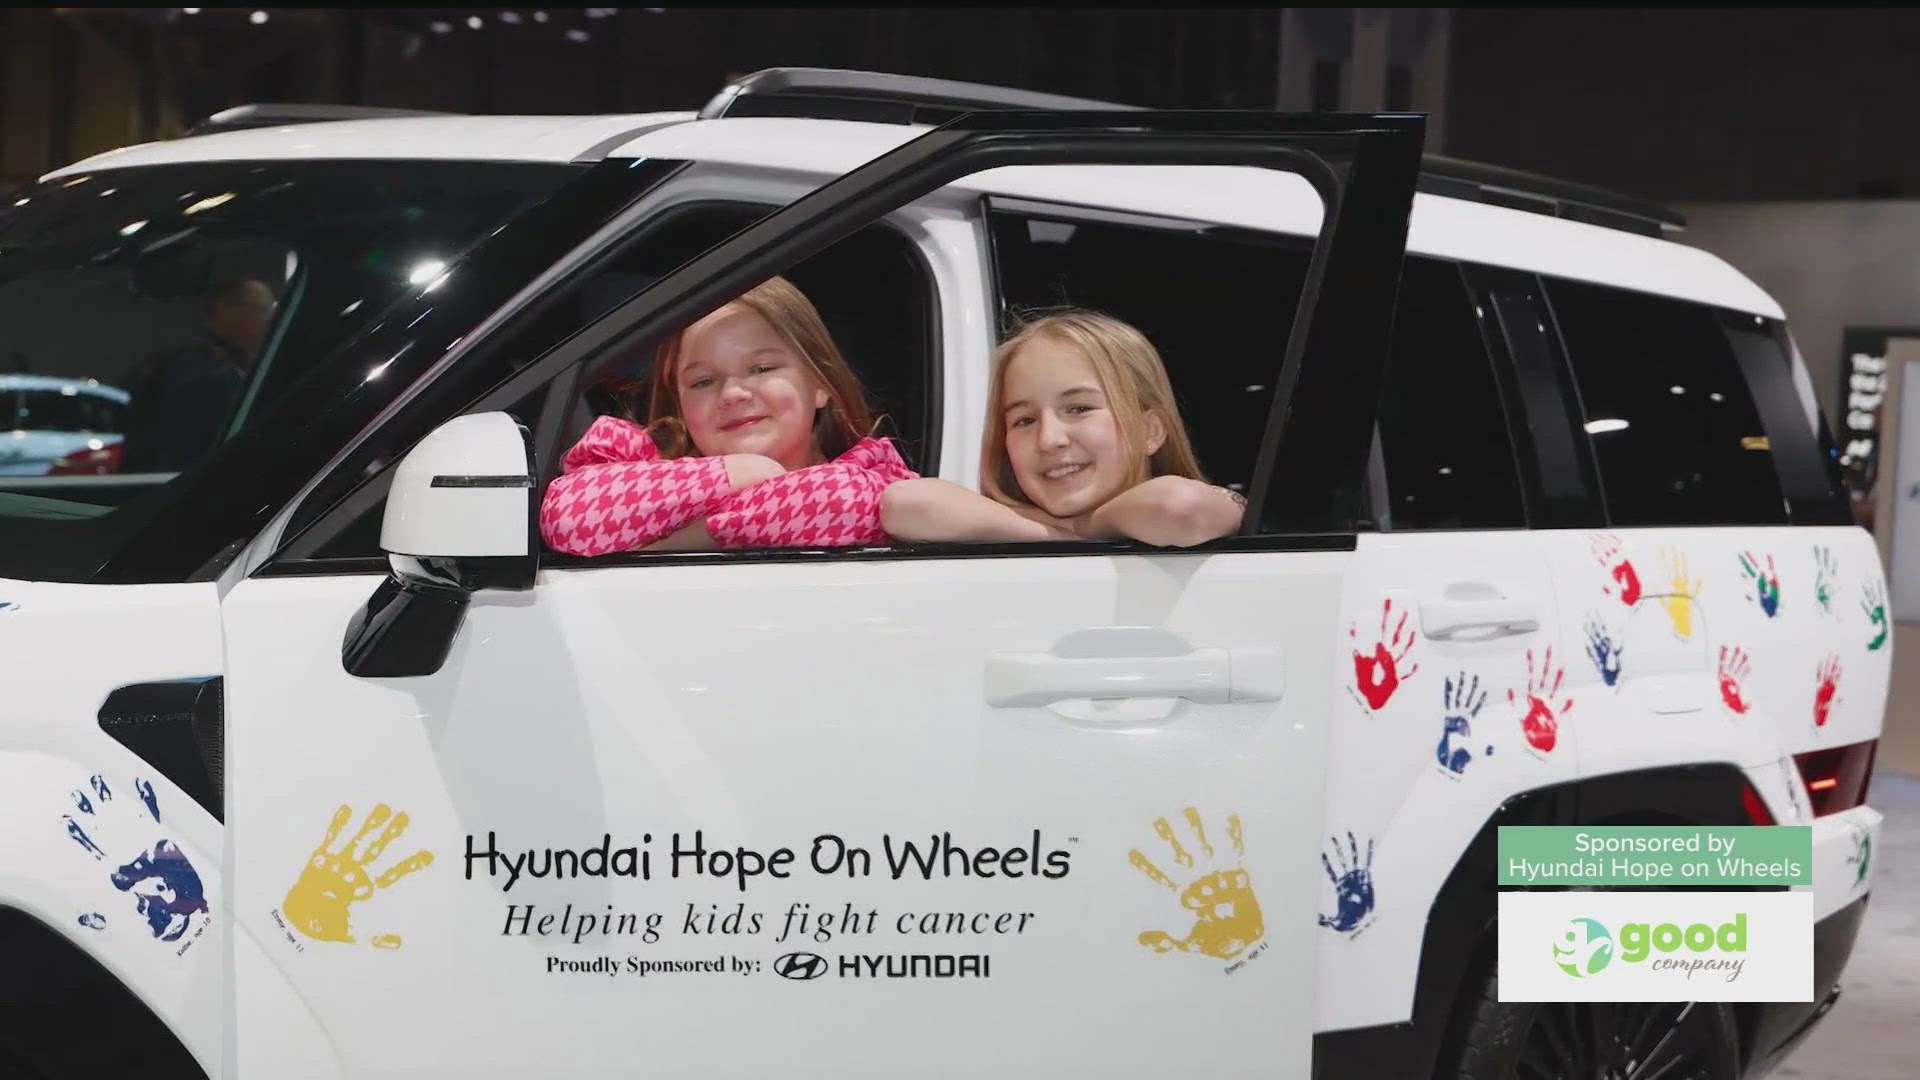 Katherine talks with John Guastaferro and Emmy Cole about how you can get involved and help fight against cancer. Sponsored by: Hyundai Hope on Wheels